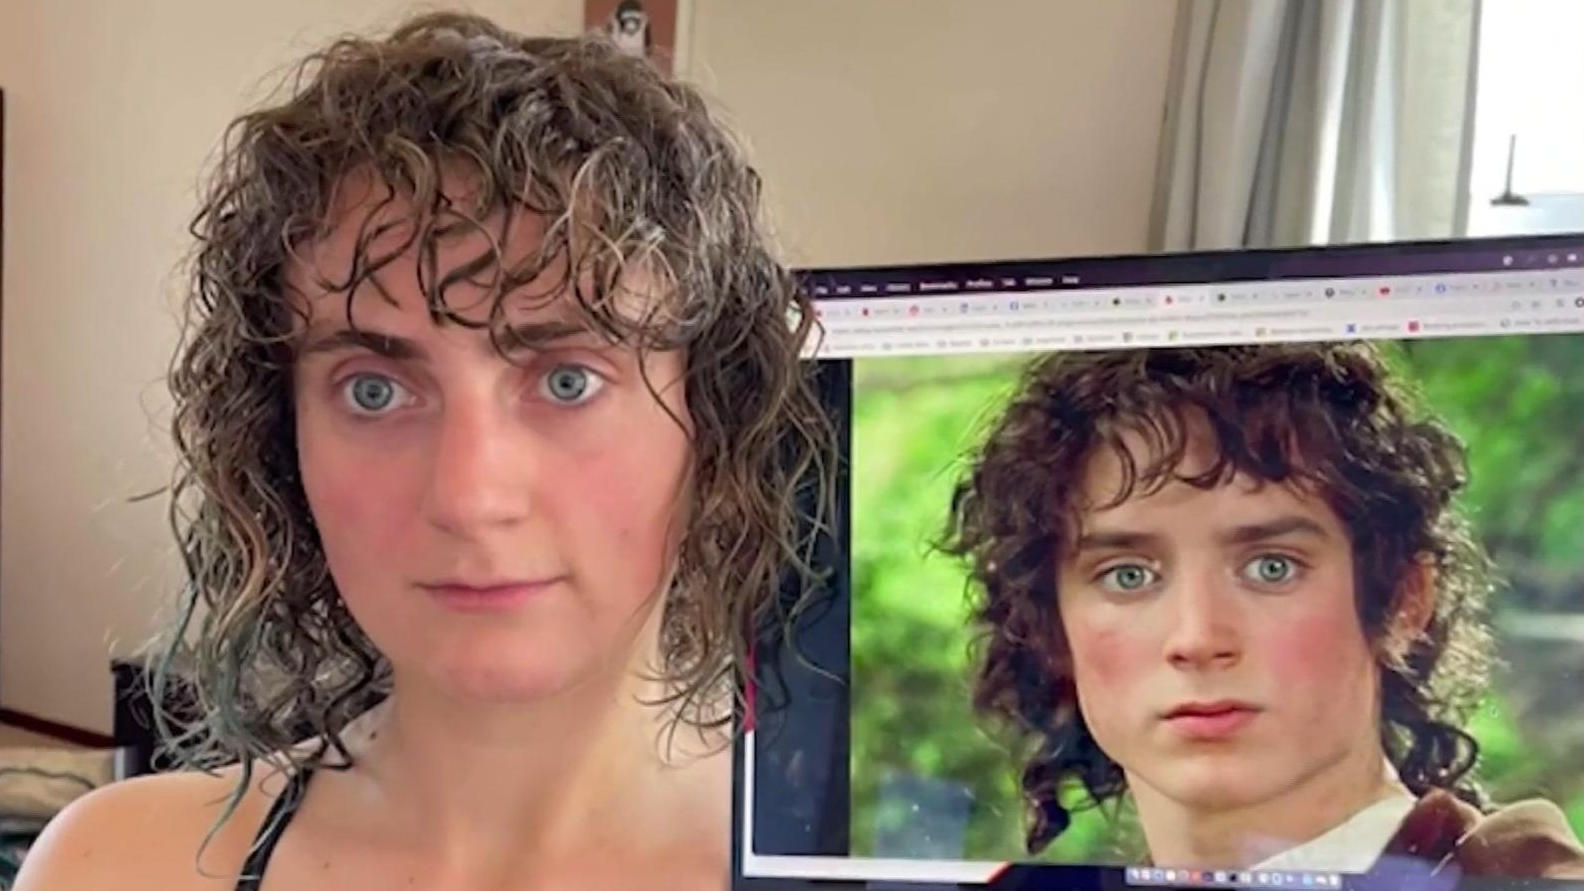 This makeover went completely wrong!  Frodo haircut par excellence